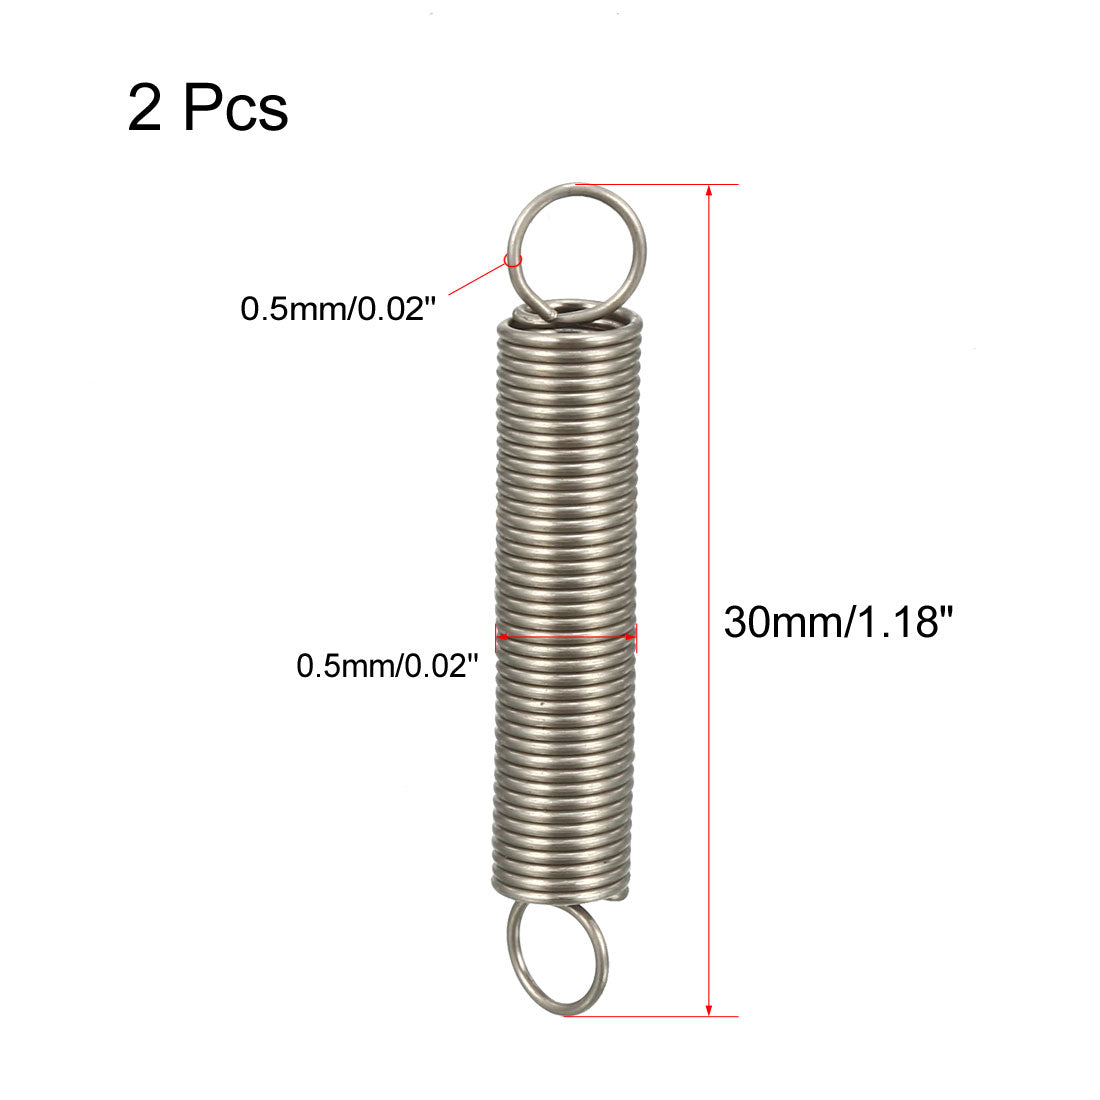 uxcell Uxcell Extended Tension Spring Wire Diameter 0.02", OD 0.2", Free Length 1.18" 2pcs